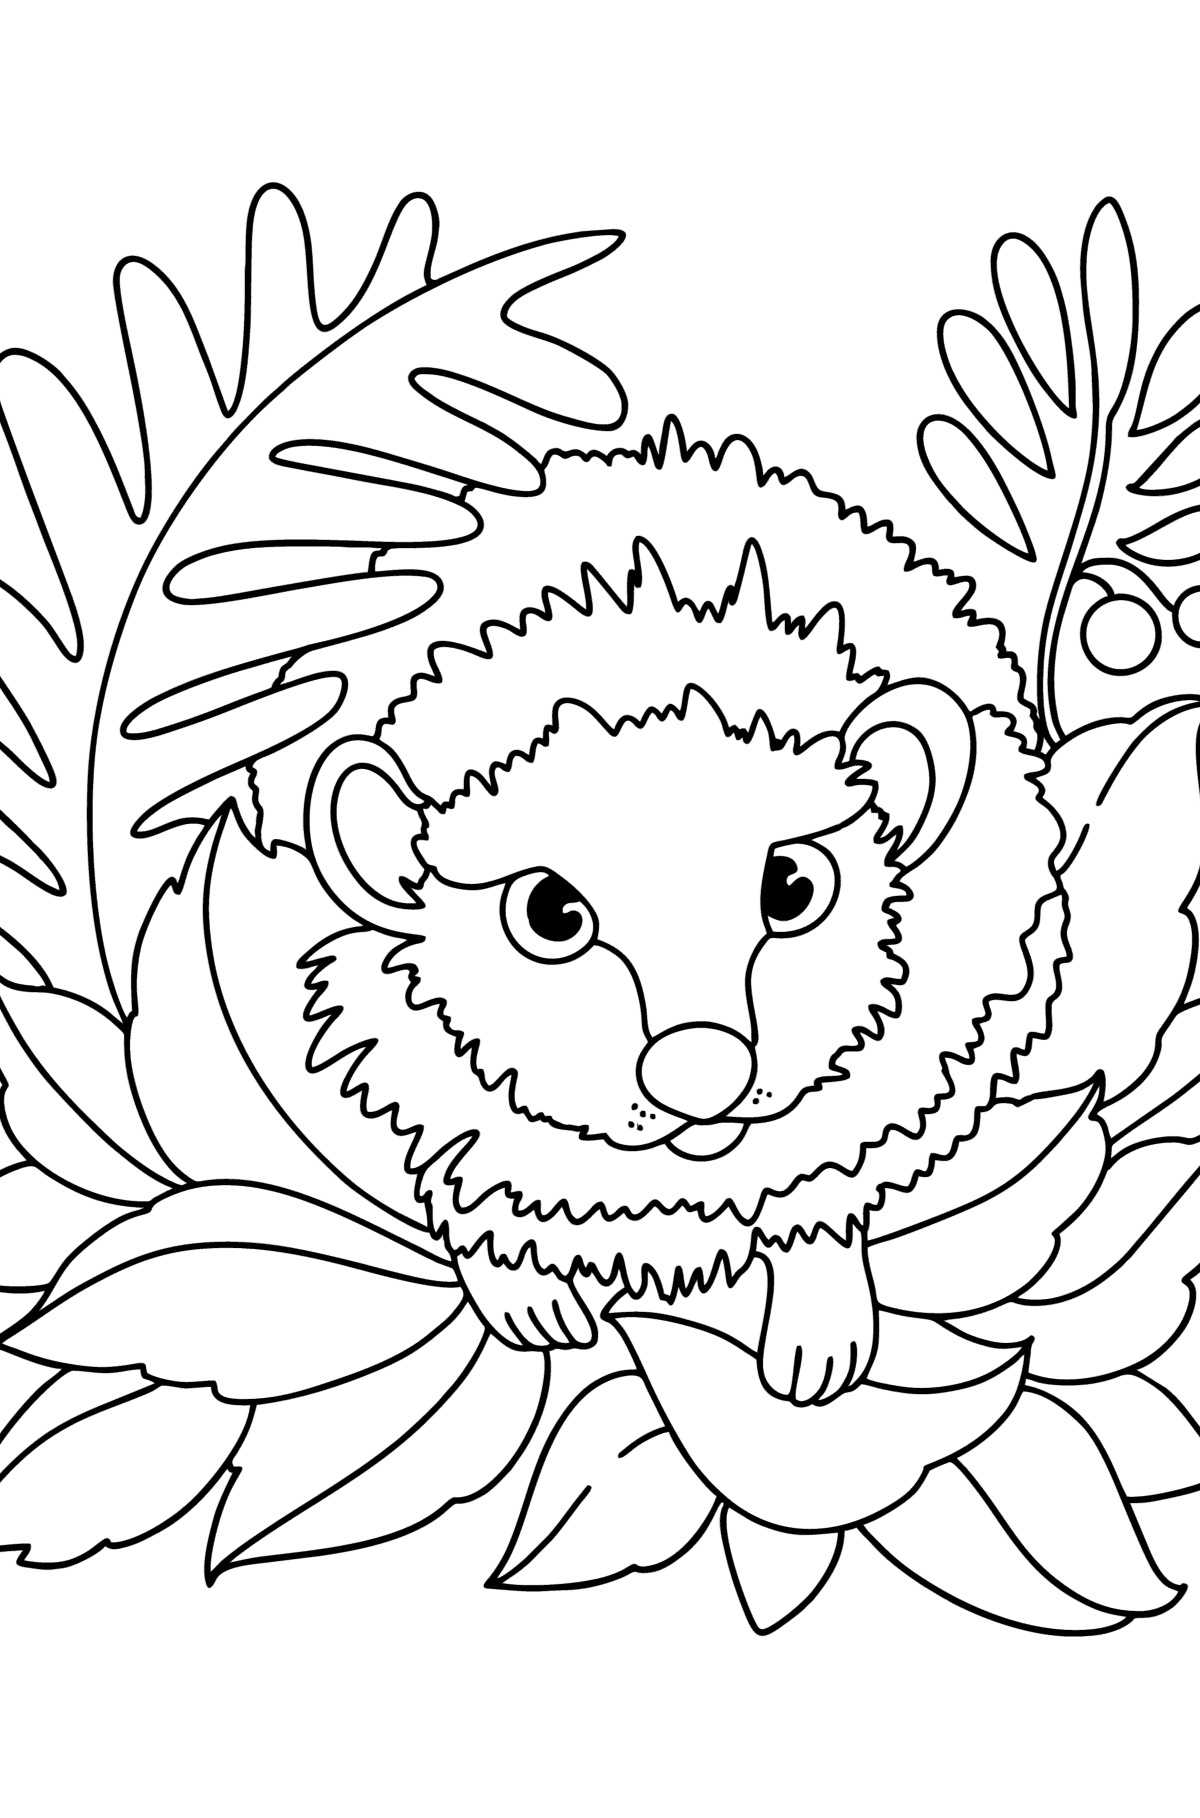 Frightened hedgehog сoloring page - Coloring Pages for Kids